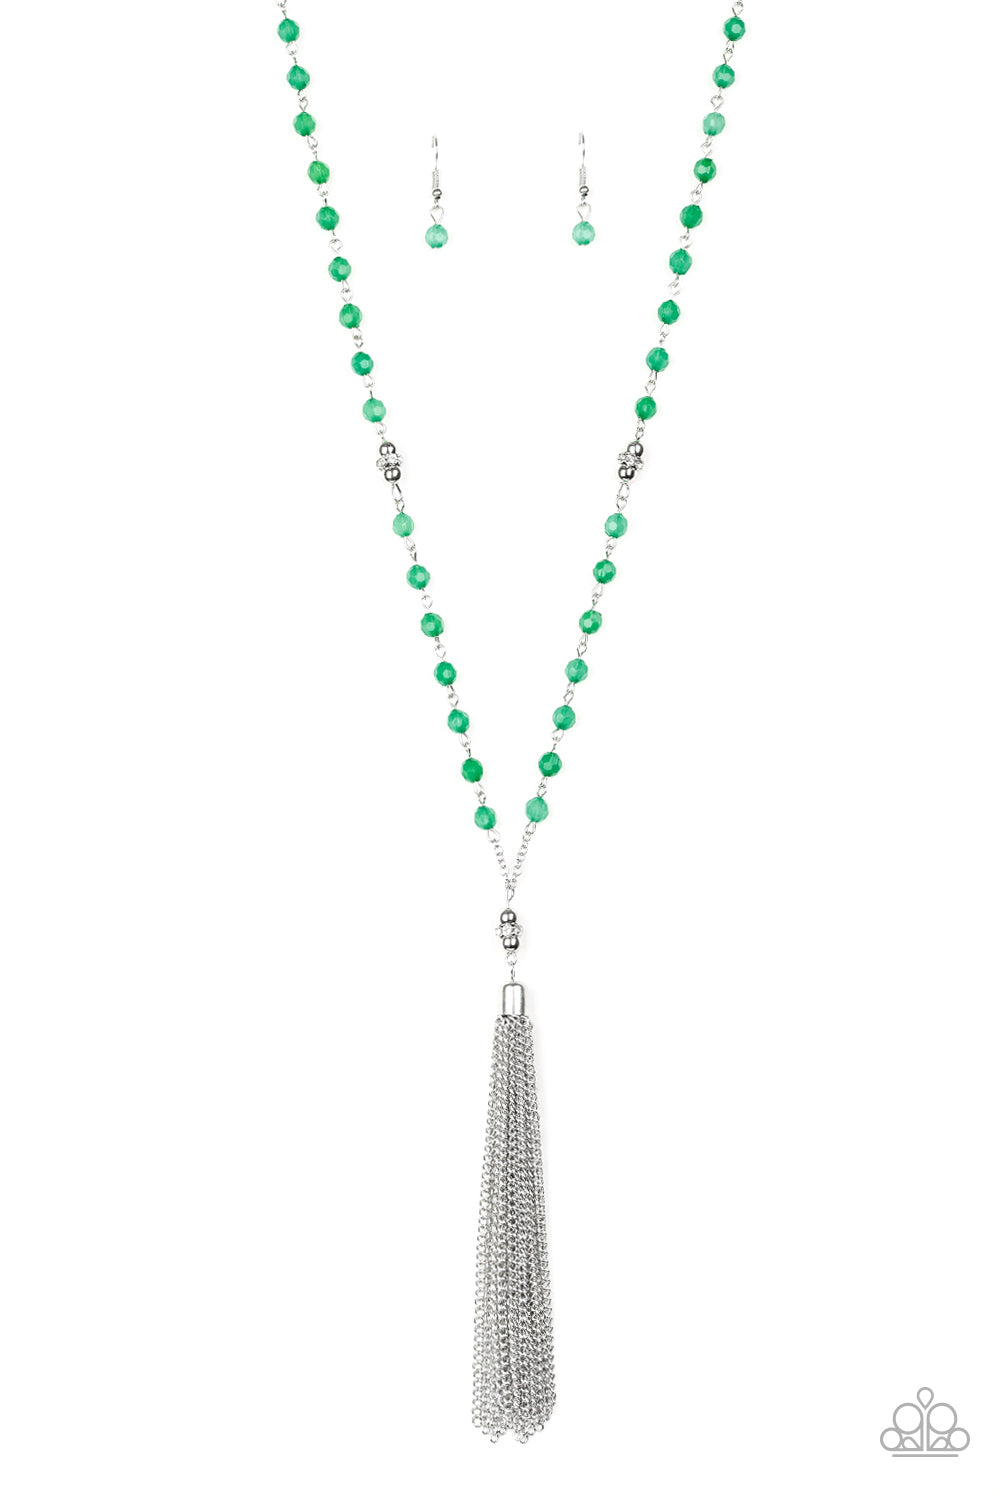 Green opaque crystal-like beads, shiny silver beads, and white rhinestone encrusted rings give way to a shimmery silver tassel for a whimsical look. Features an adjustable clasp closure.